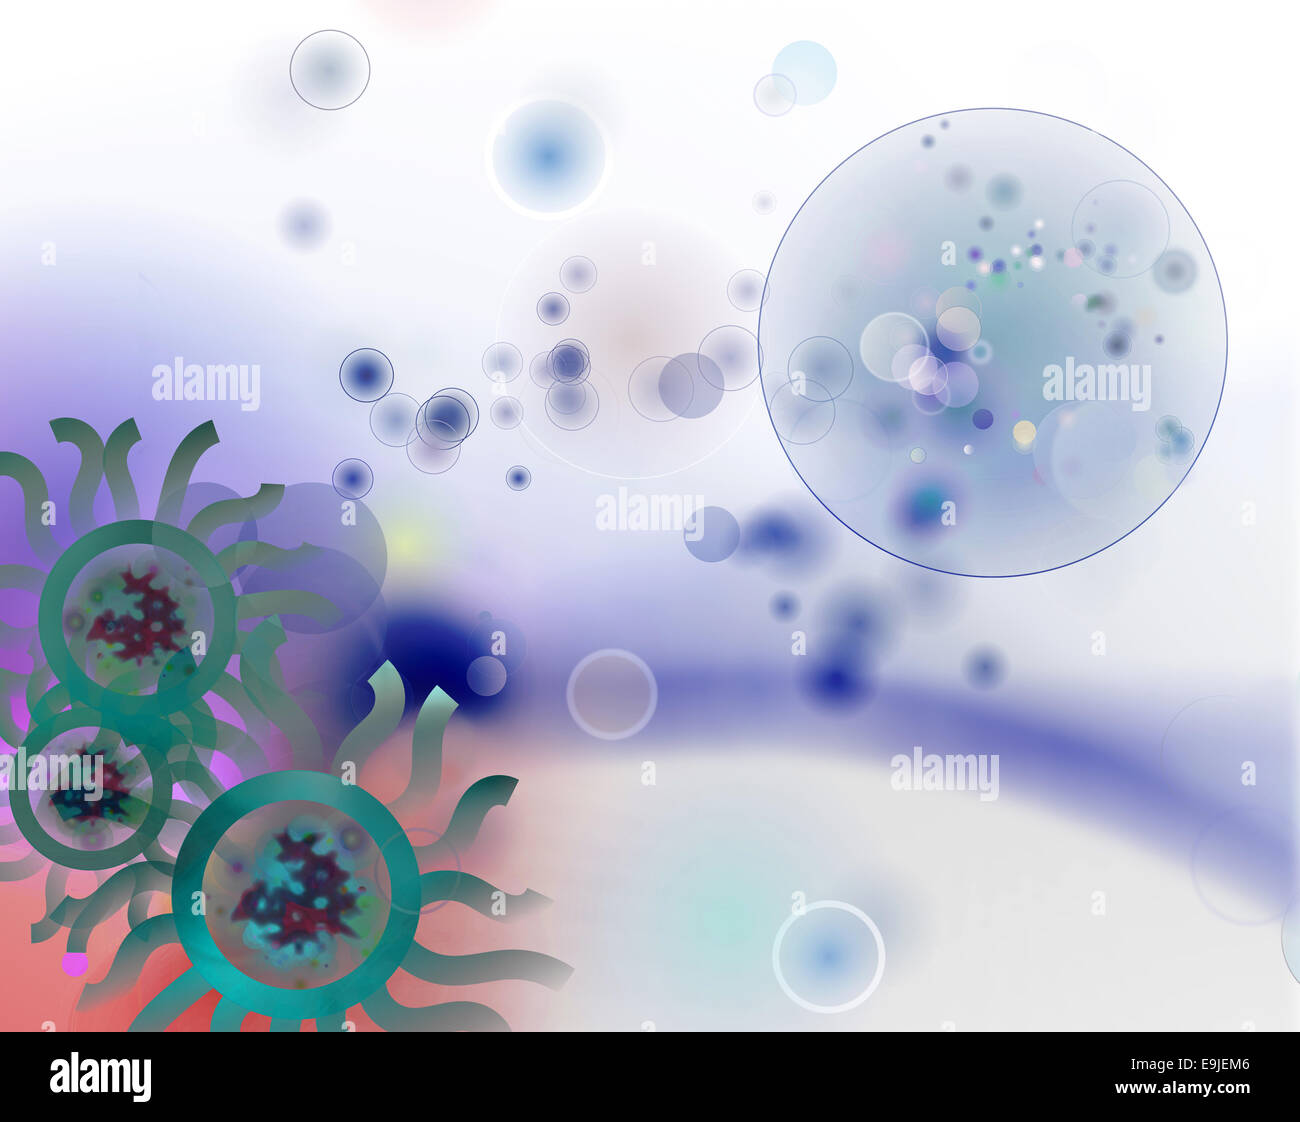 cell infection graphic Stock Photo